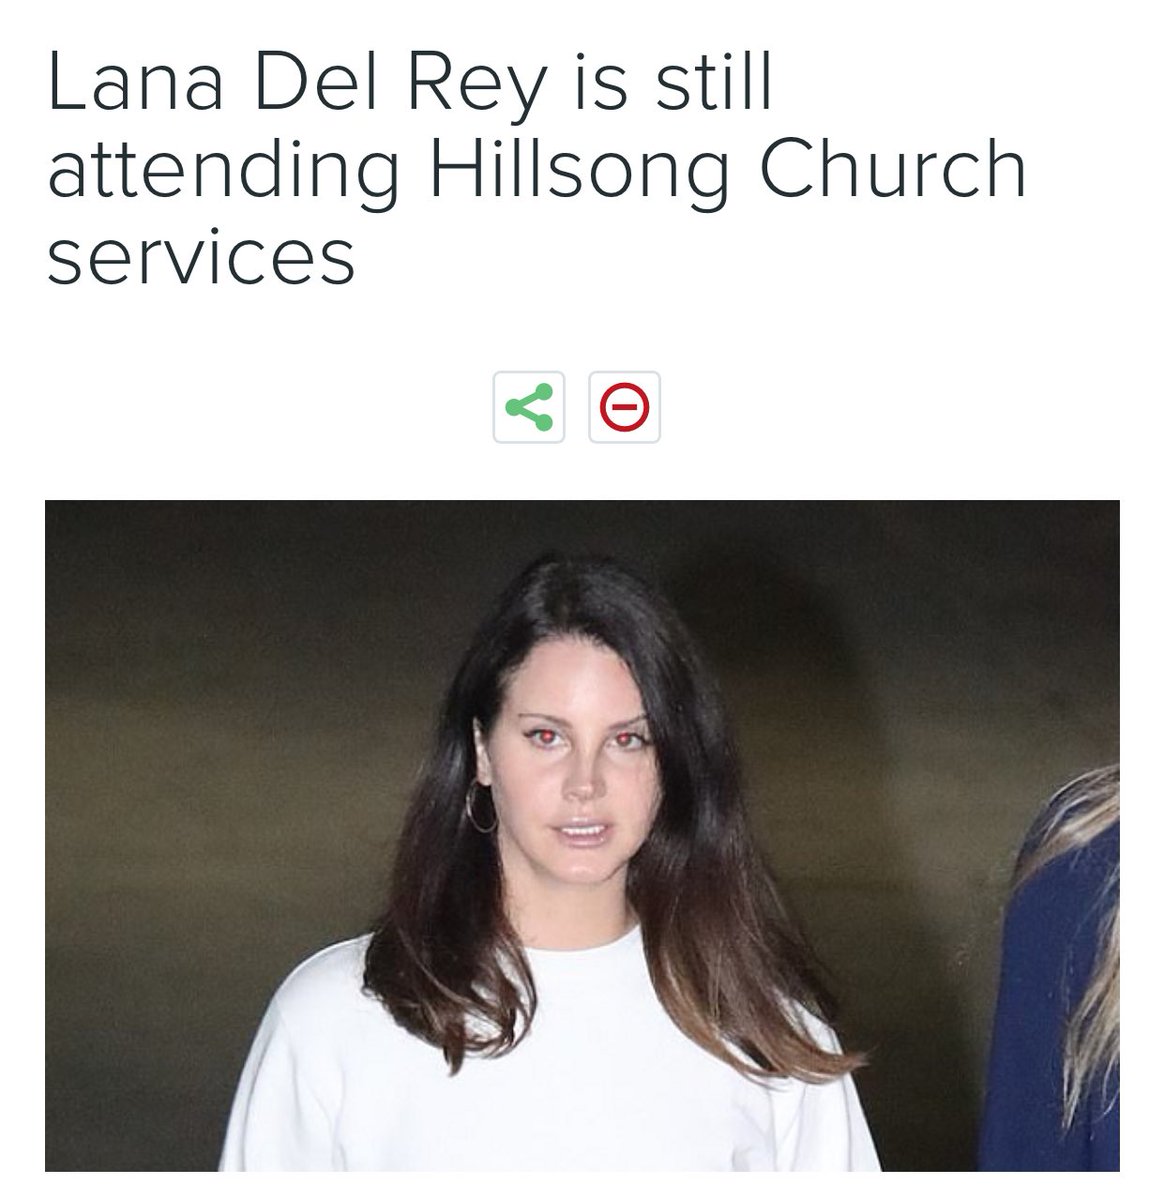 1. Lana was raised in a Catholic school (which I respect), but around last year she was spotted multiple times going to LA Hillsong Church, a church known for it's homophobia. They always talk about homosexuality like it's something that needs medical treatment.